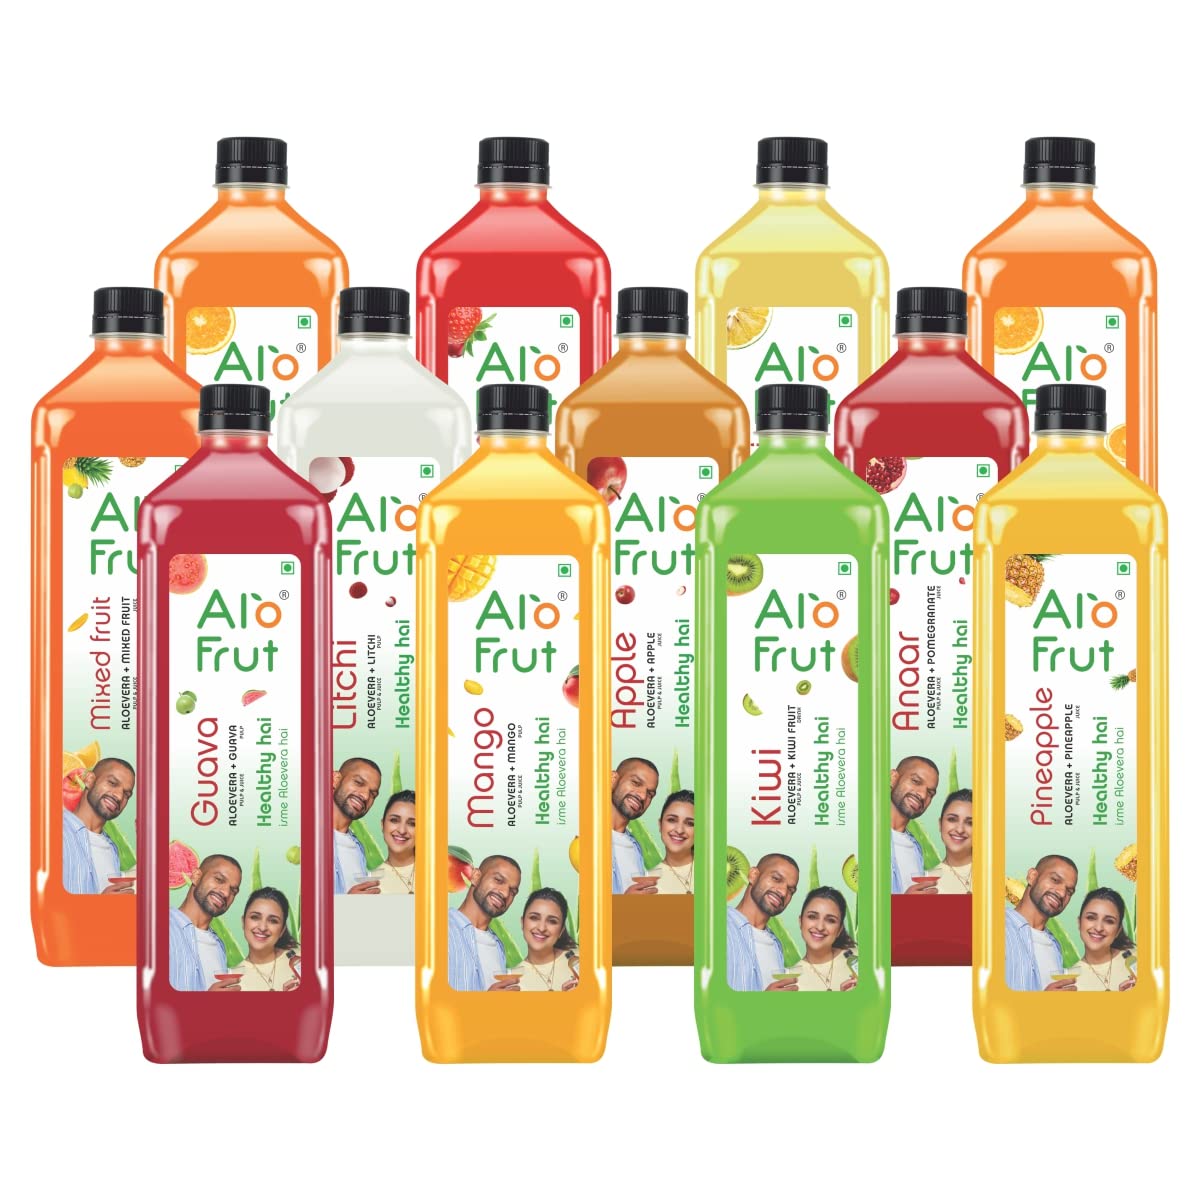 Alo Frut Juices 1L - Pack of 4 | Fruit Juice and Aloevera Pulp | 1 ea of Flavours Litchi Kiwi, Berries, Mango